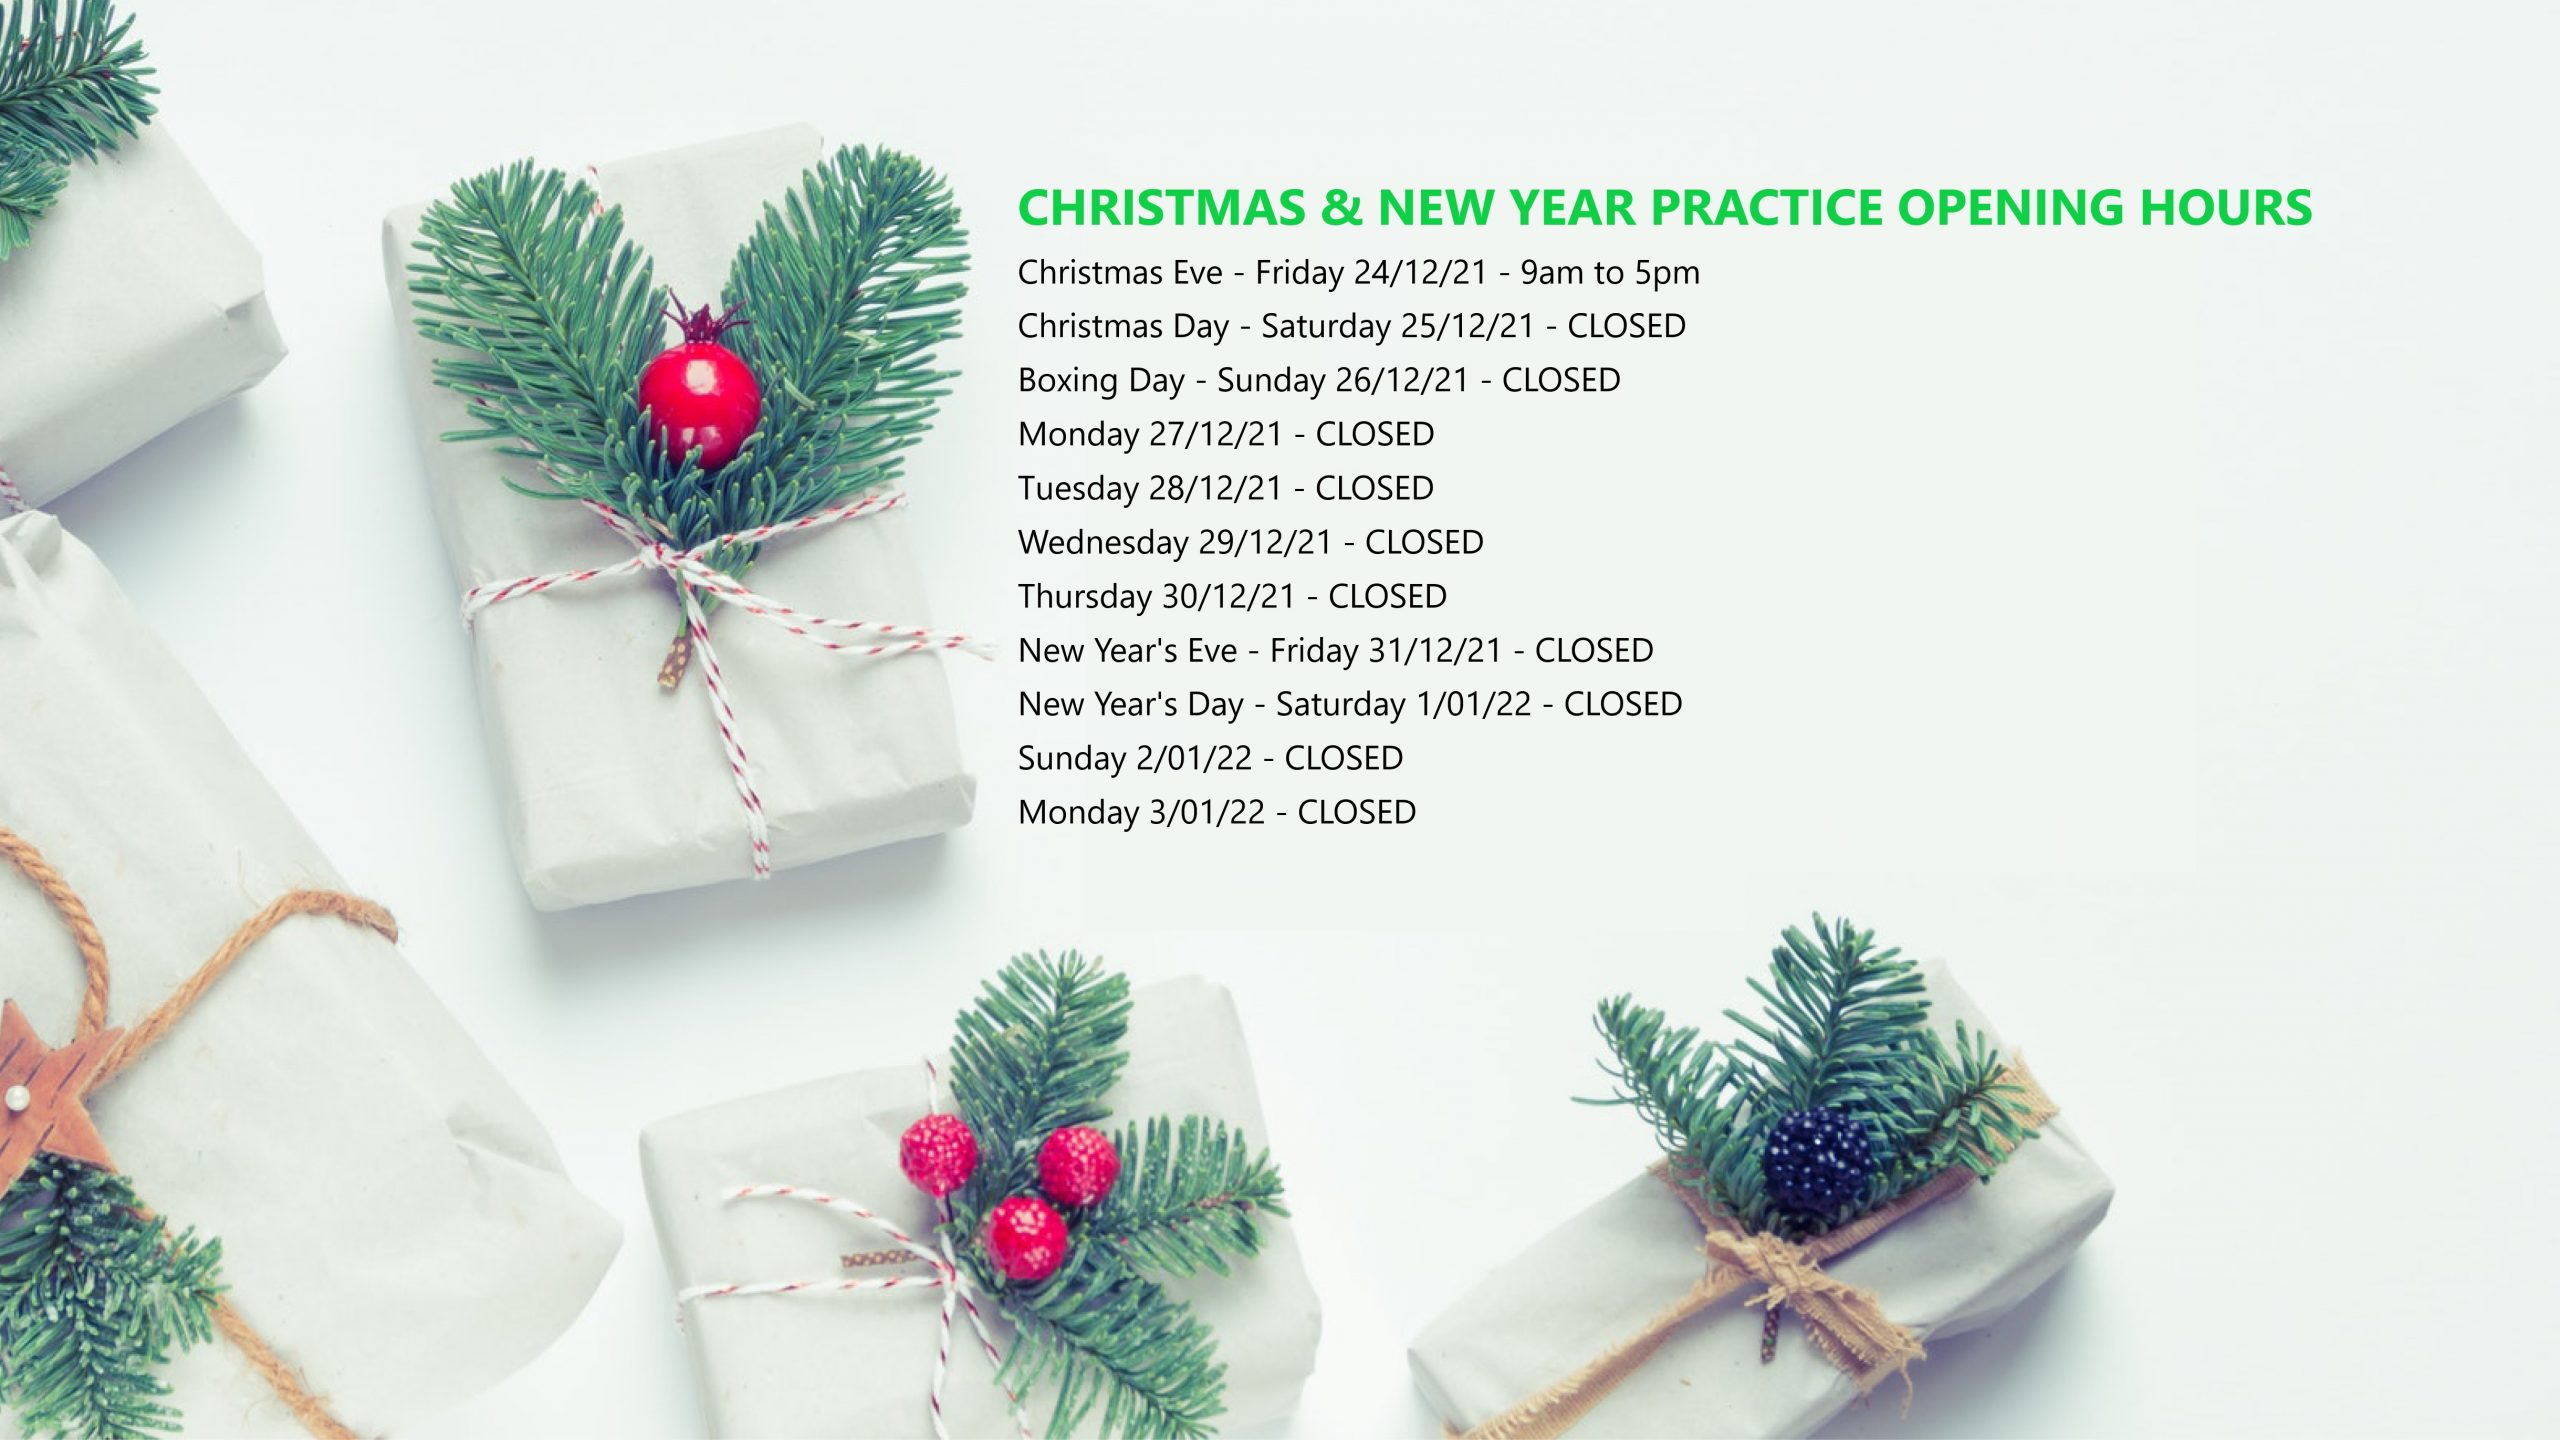 Christmas & New Year Hours 2021/2022